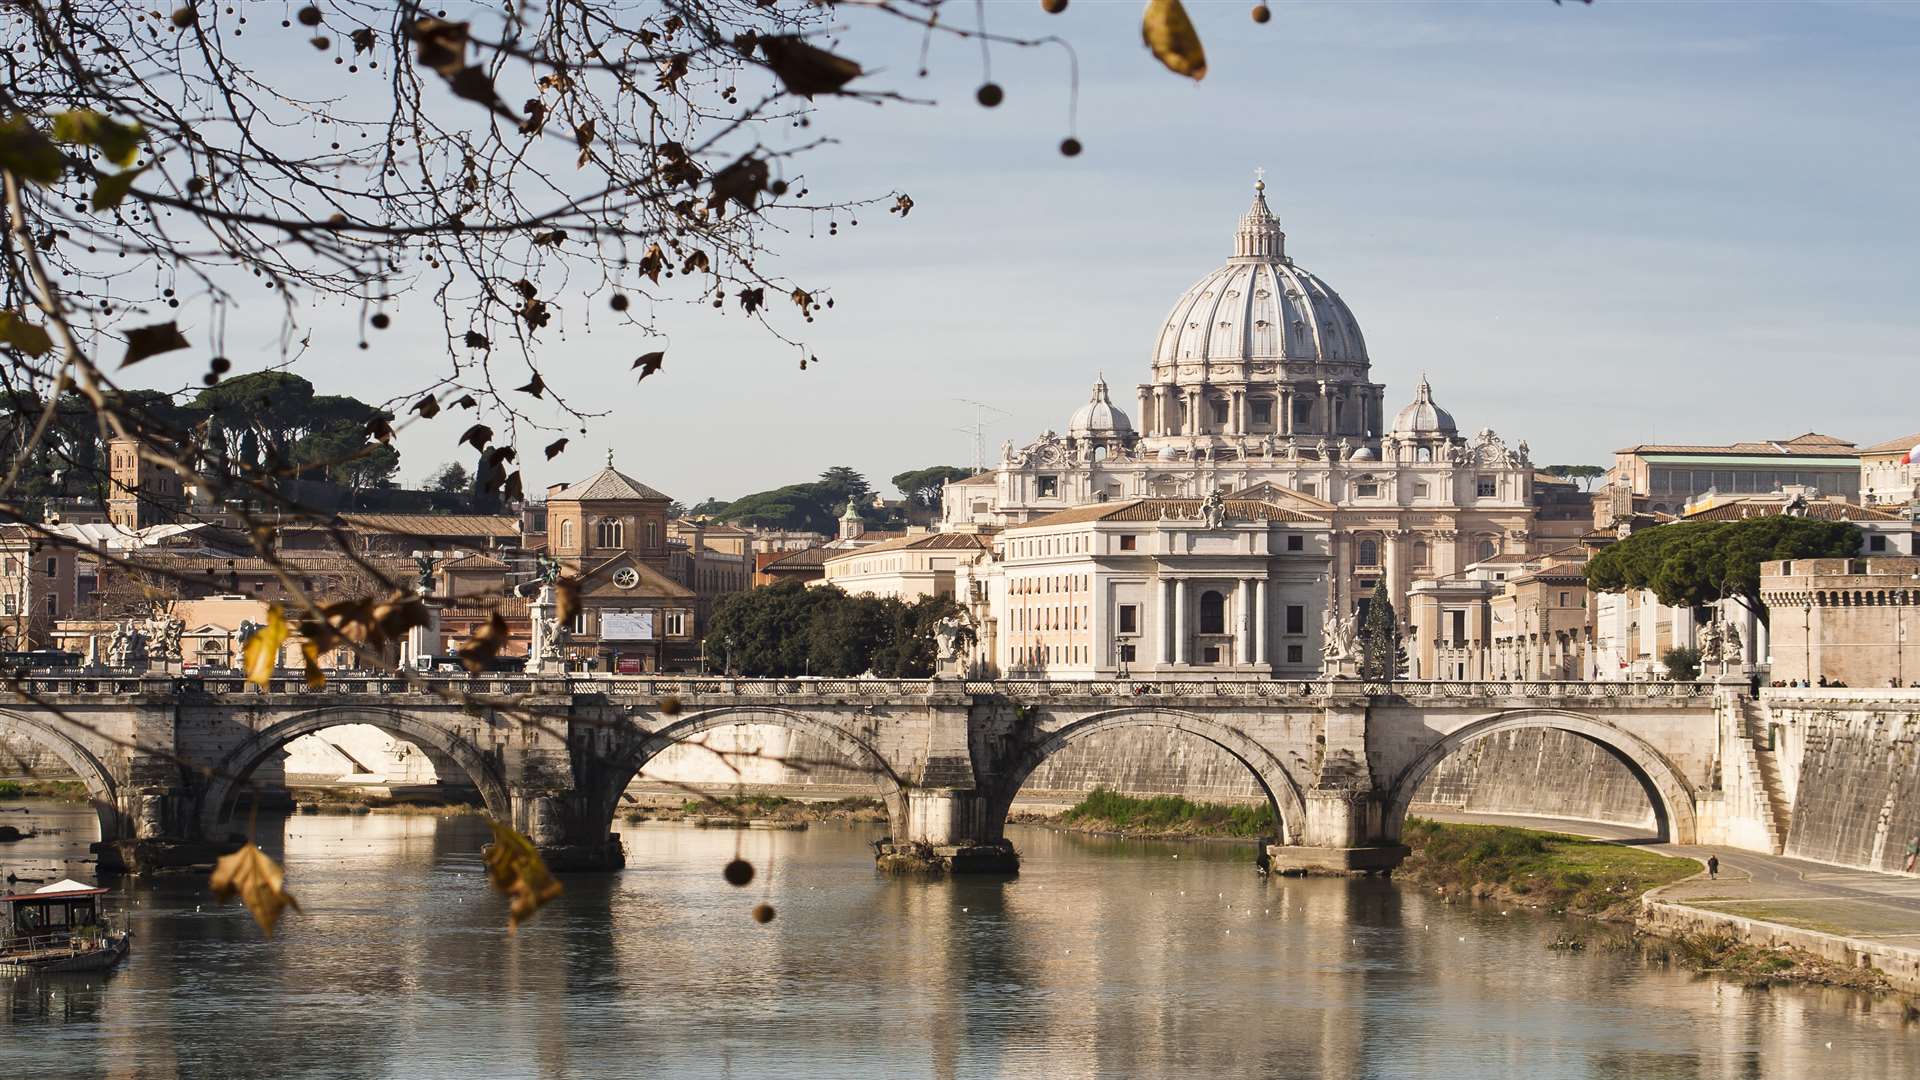 St. Peter's Basilica in Vatican City. Picture: Thinkstock